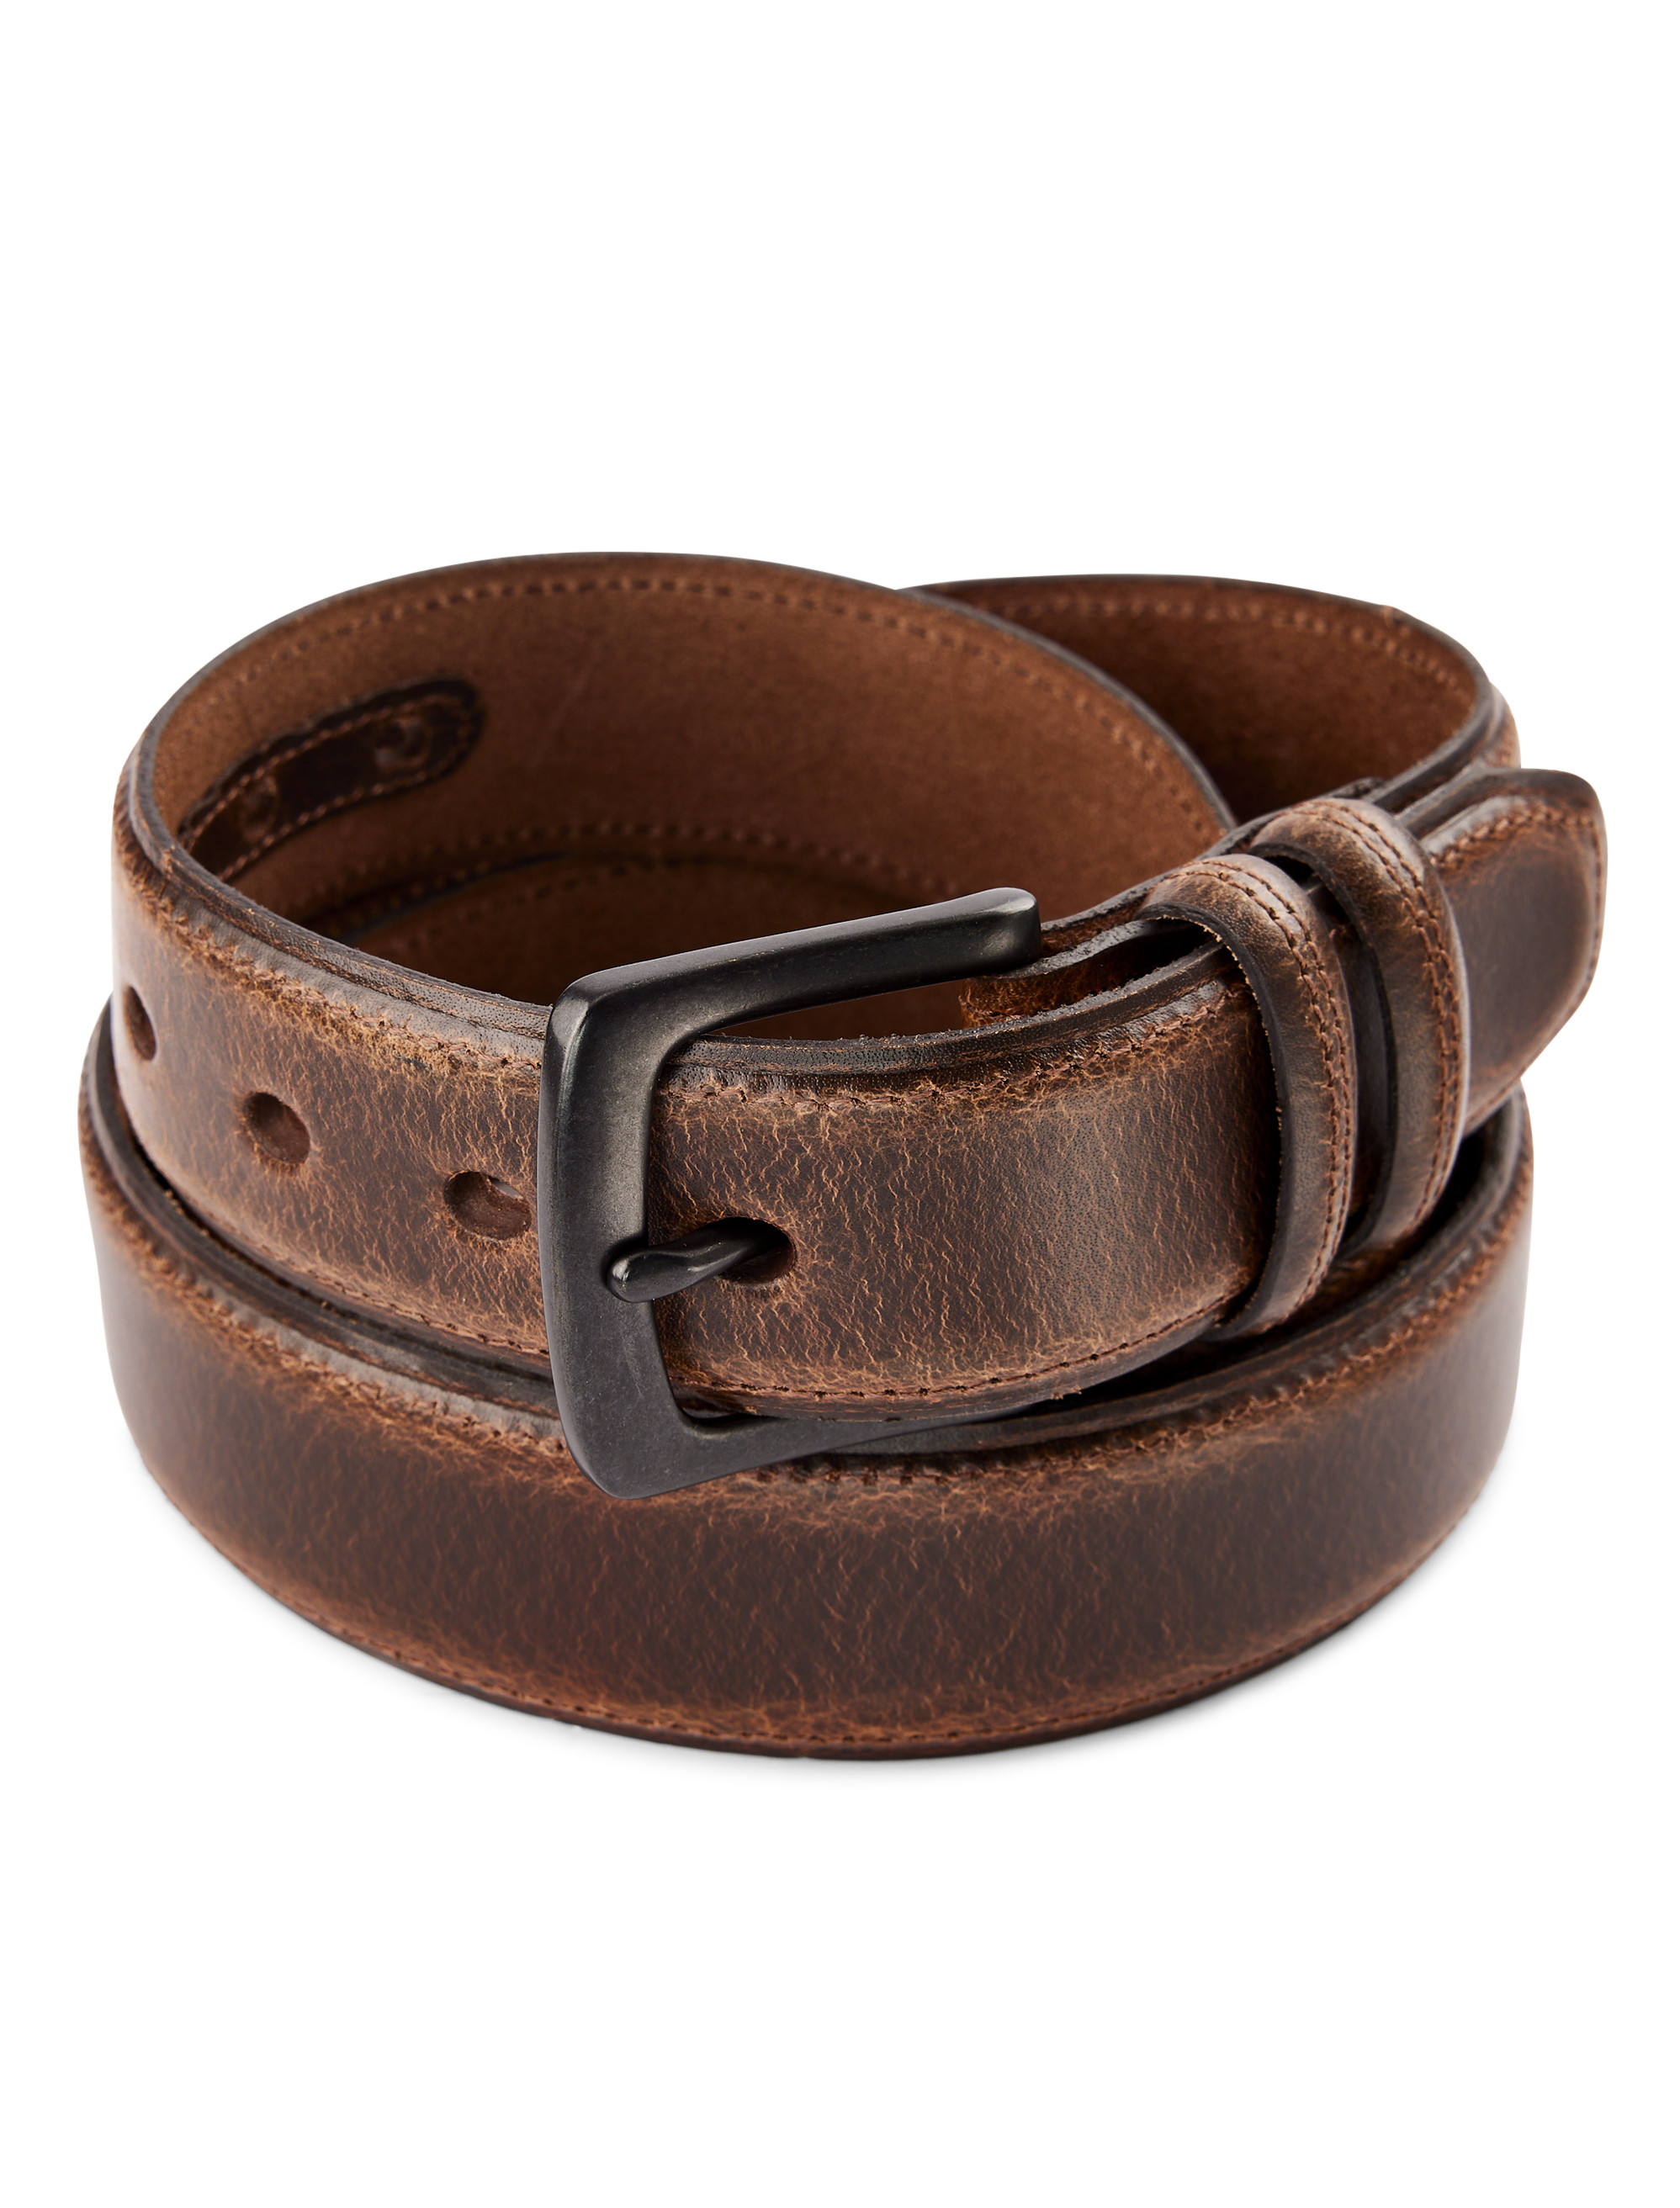 Brooks Brothers Men's Braided Leather Belt | Dark Brown | Size 34 - Shop Holiday Gifts and Styles